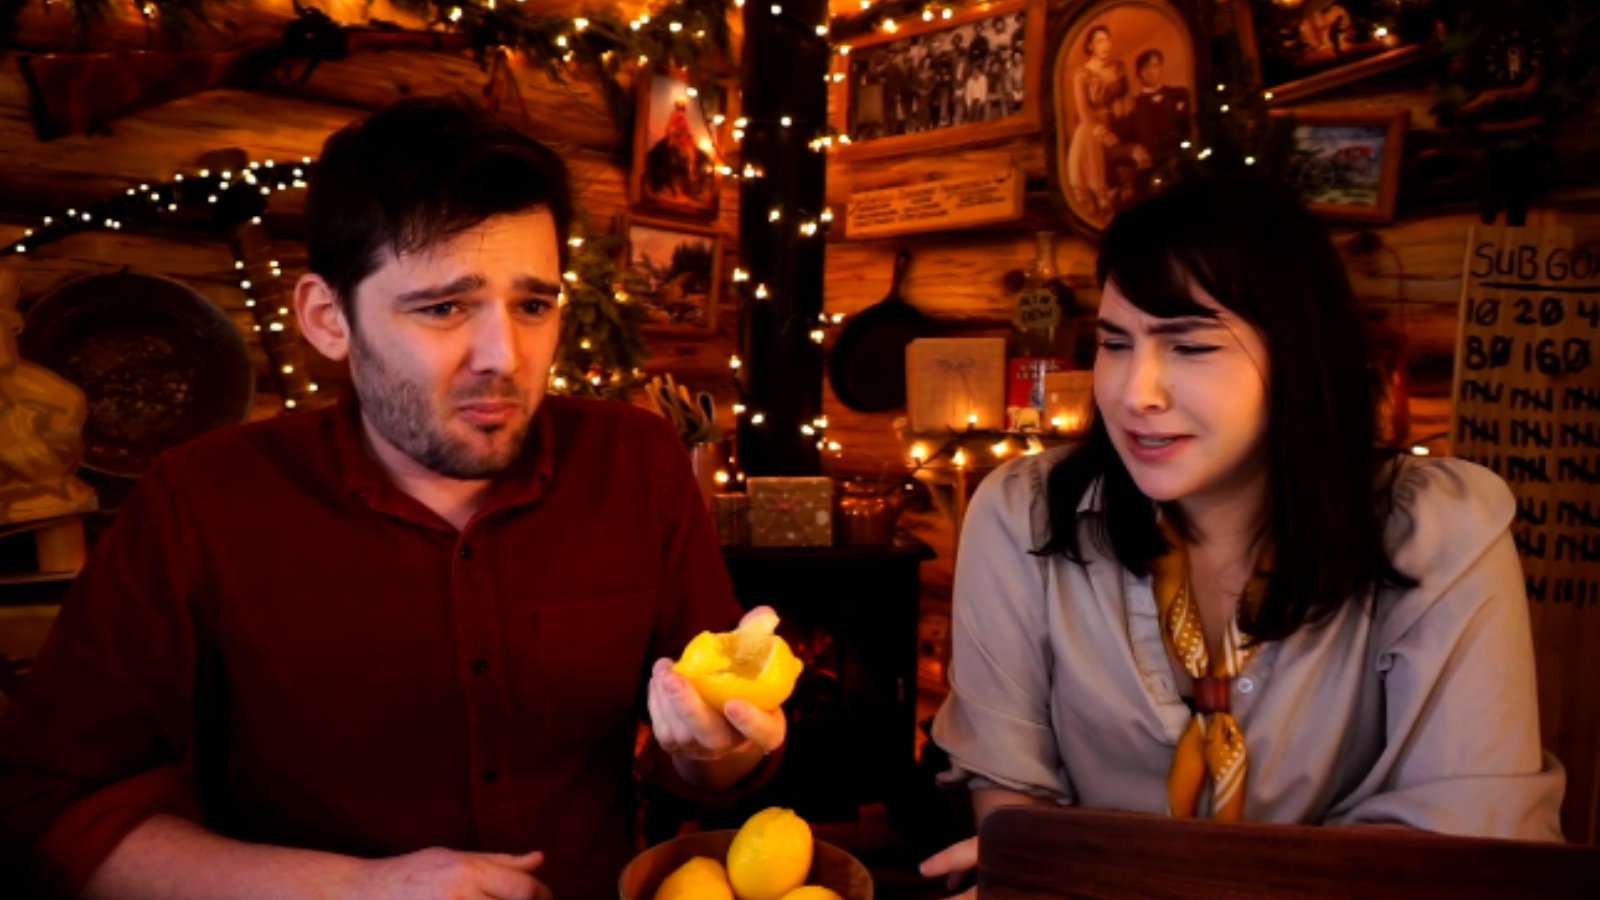 Twitch streamer squirms after eating a lemon